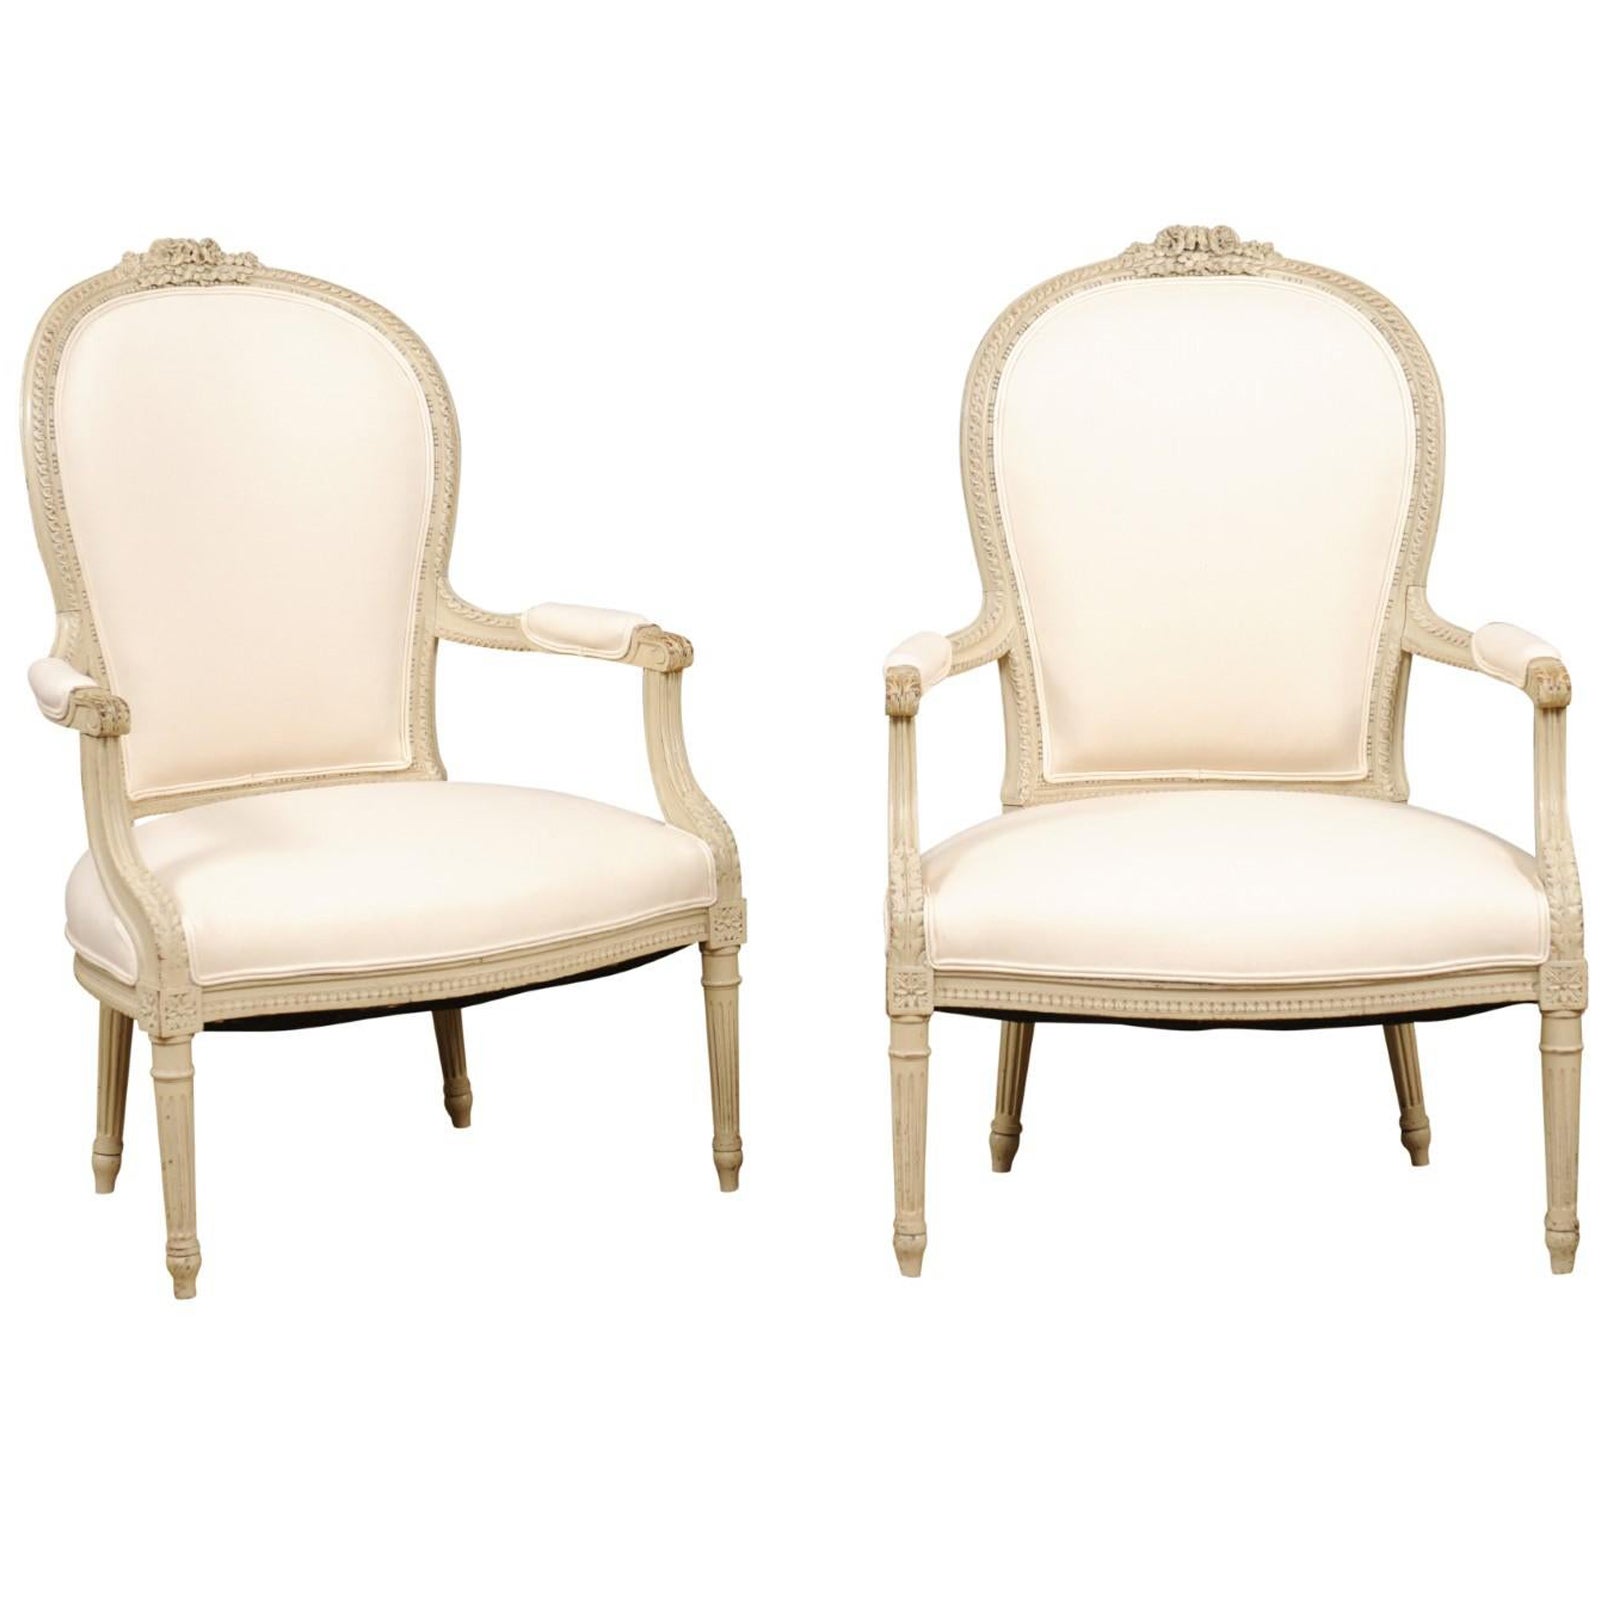 Pair of French Late 19th Century Louis XVI Style Armchairs with Carved Crest